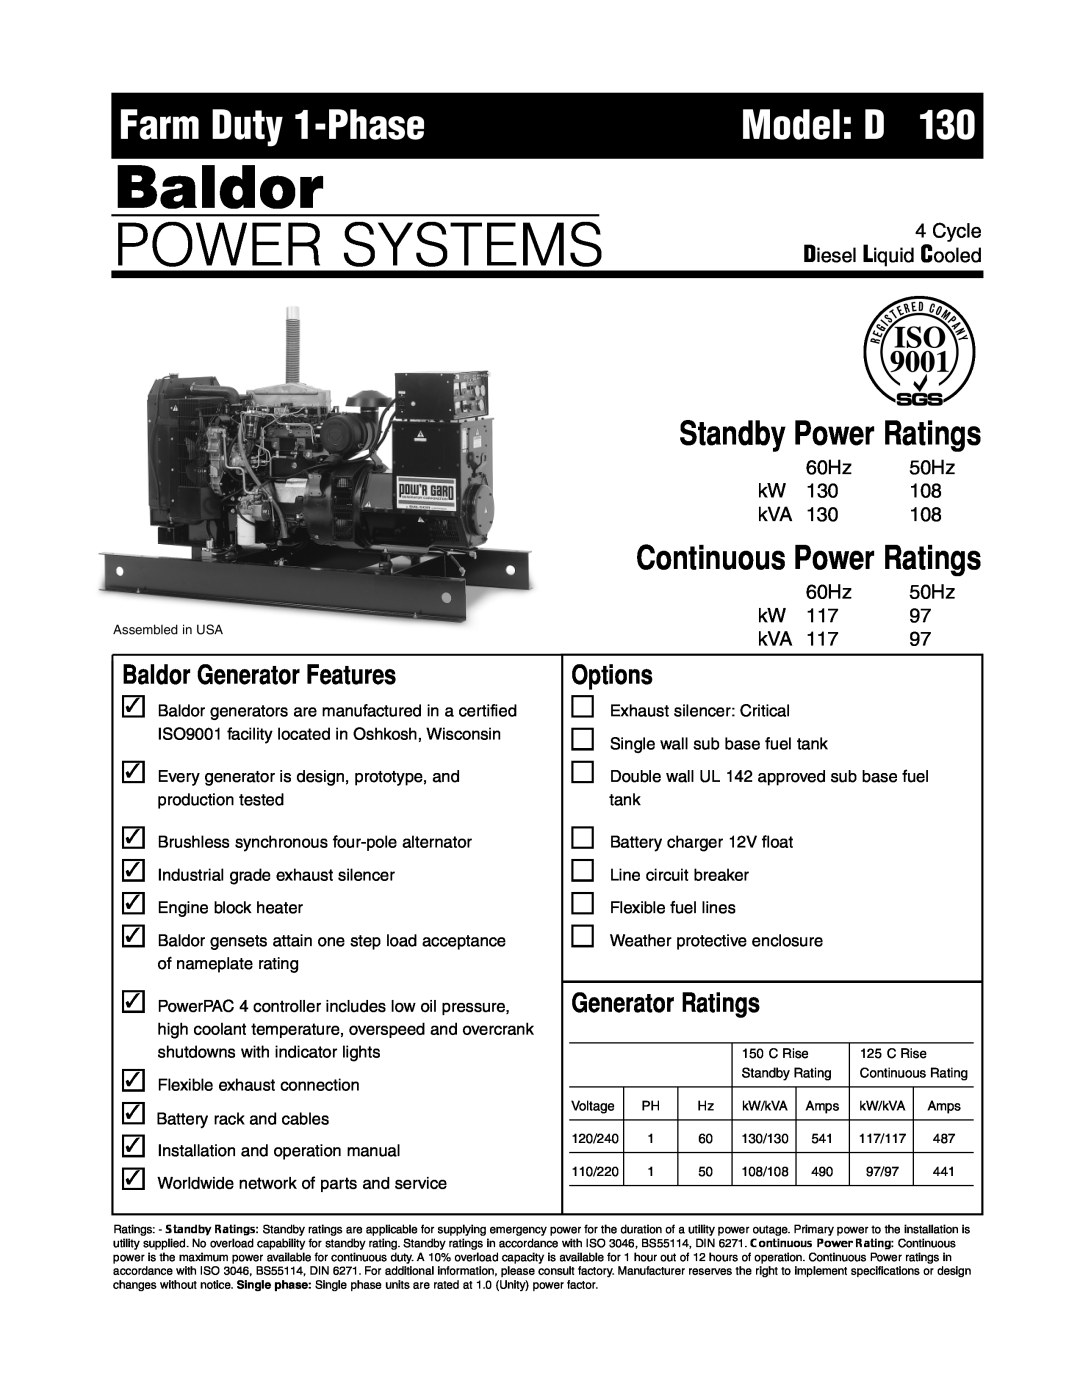 Baldor ISO9001 manual Model D130, Baldor, Power Systems, Farm Duty 1-Phase, Standby Power Ratings, Continuous Power Ratings 